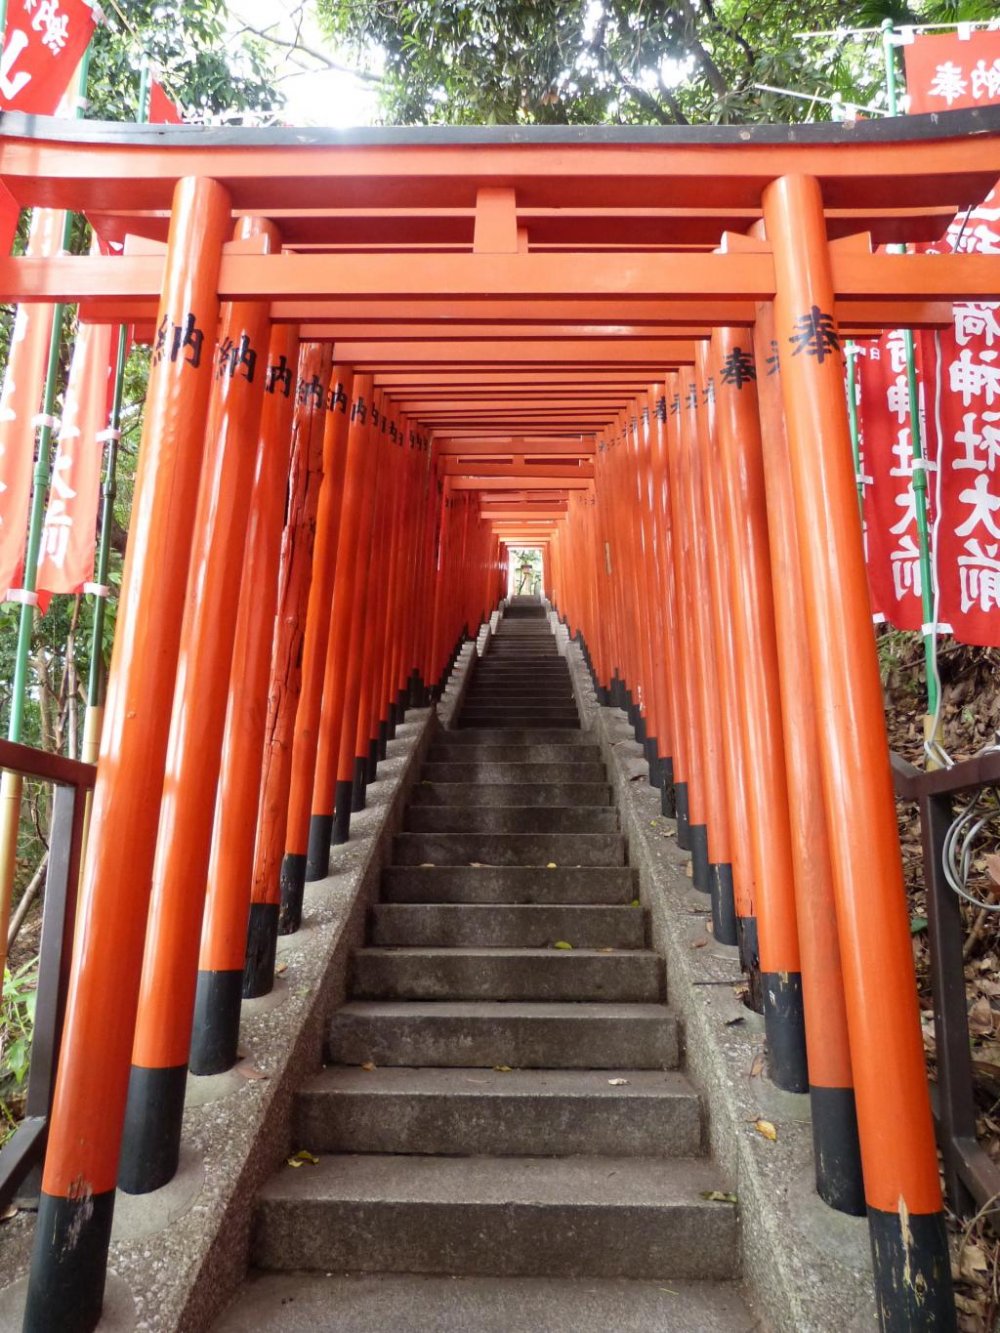 Approach to one of the small shrines inside Hie-jinja